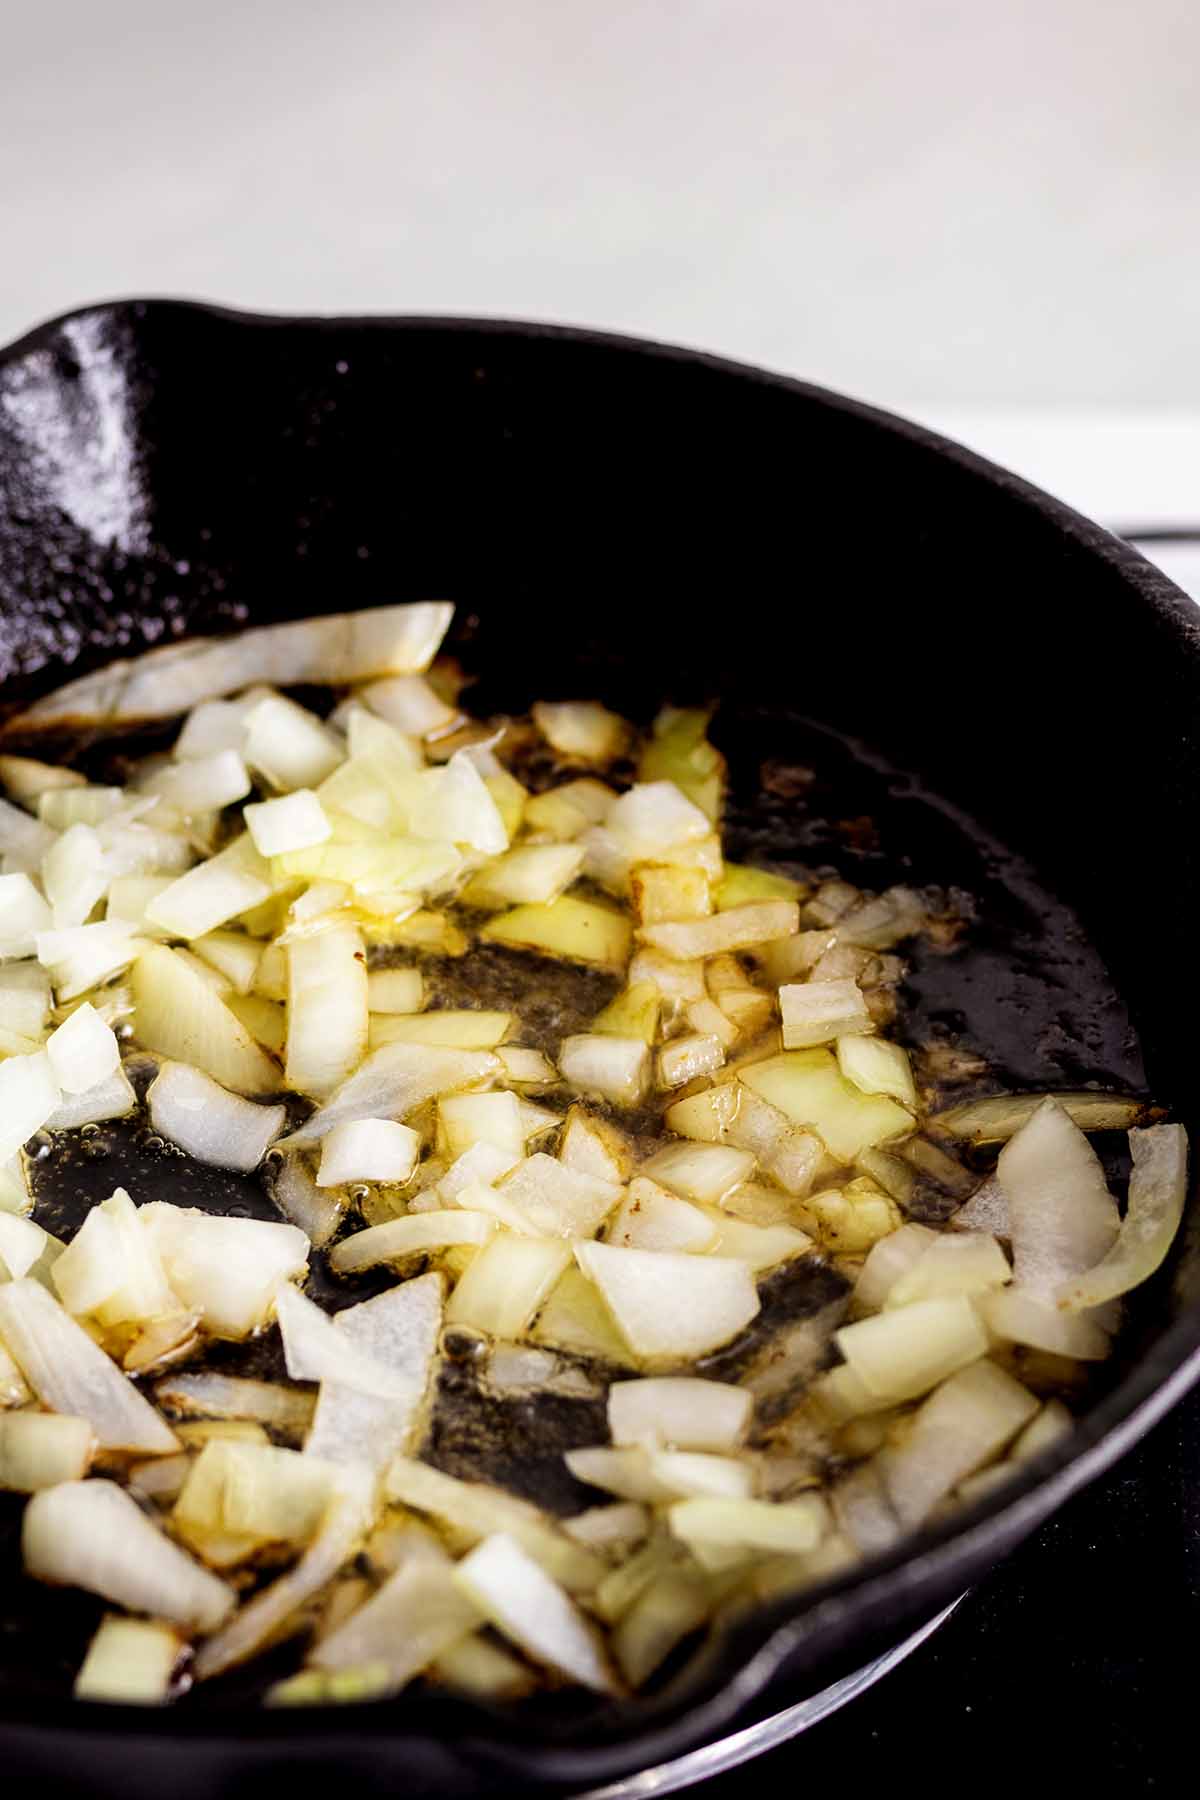 Onions cooking in a cast iron skillet